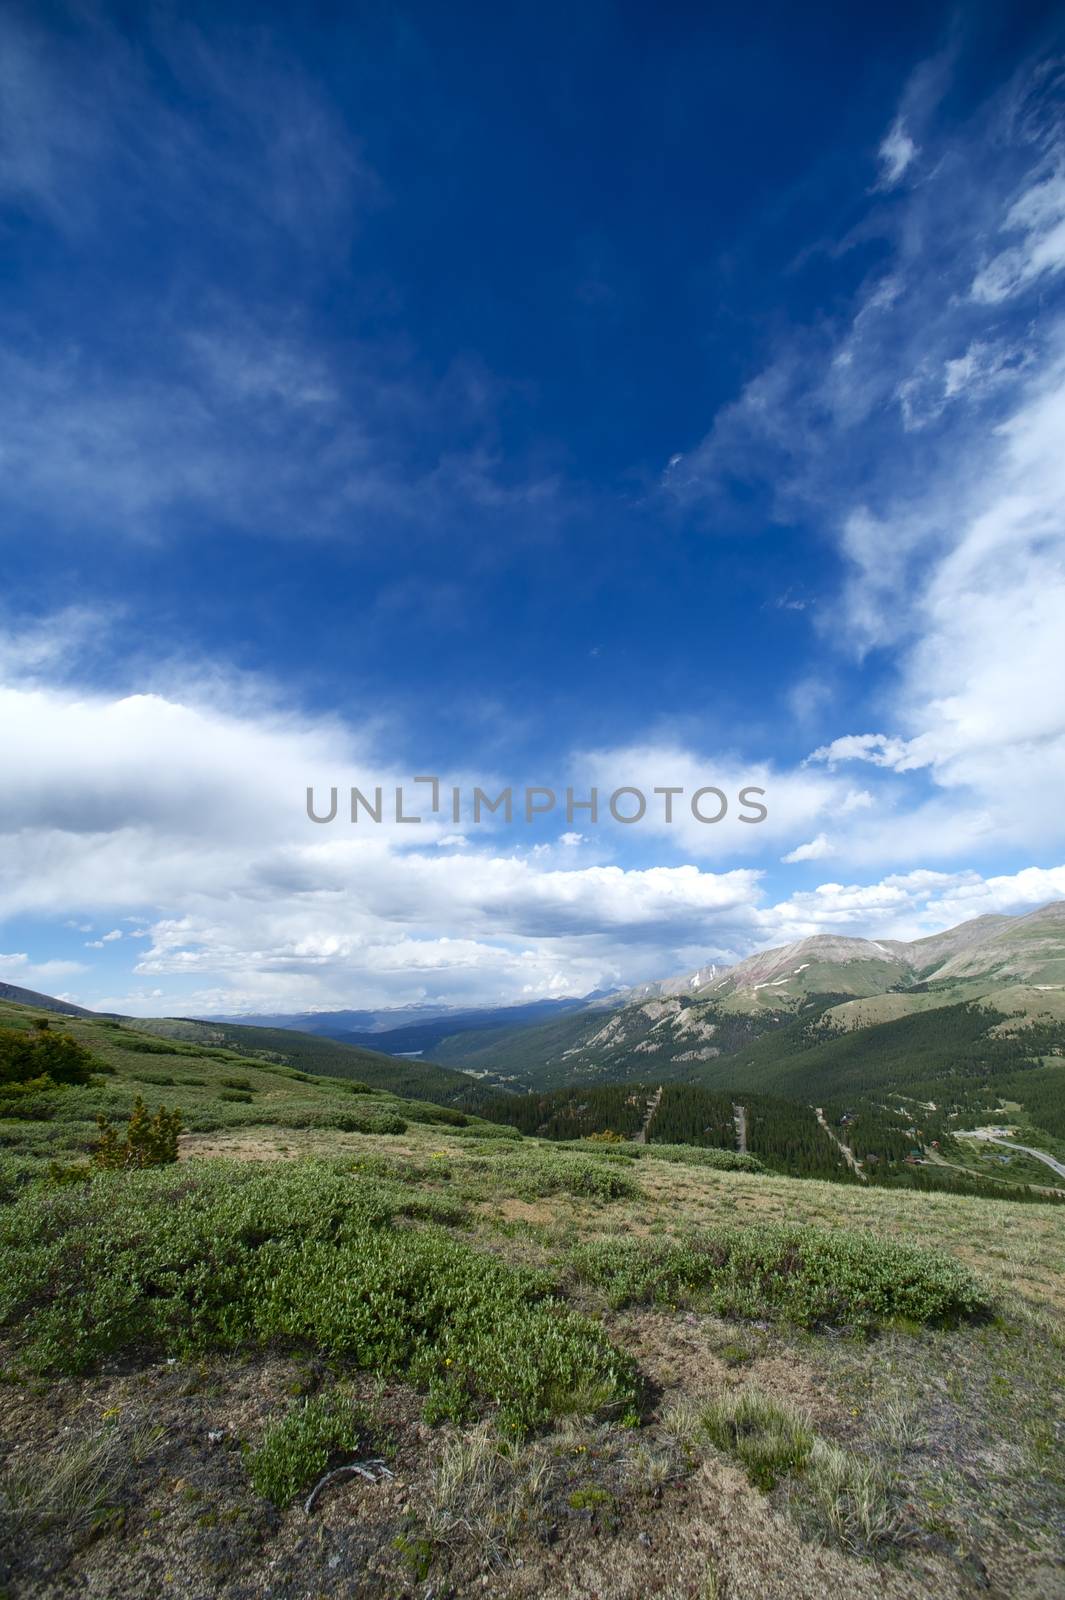 Mountains. Colorado Rocky Mountains in Summer. Clear Dark Blue Sky. Mountains Landscape. Wide Angle Photo